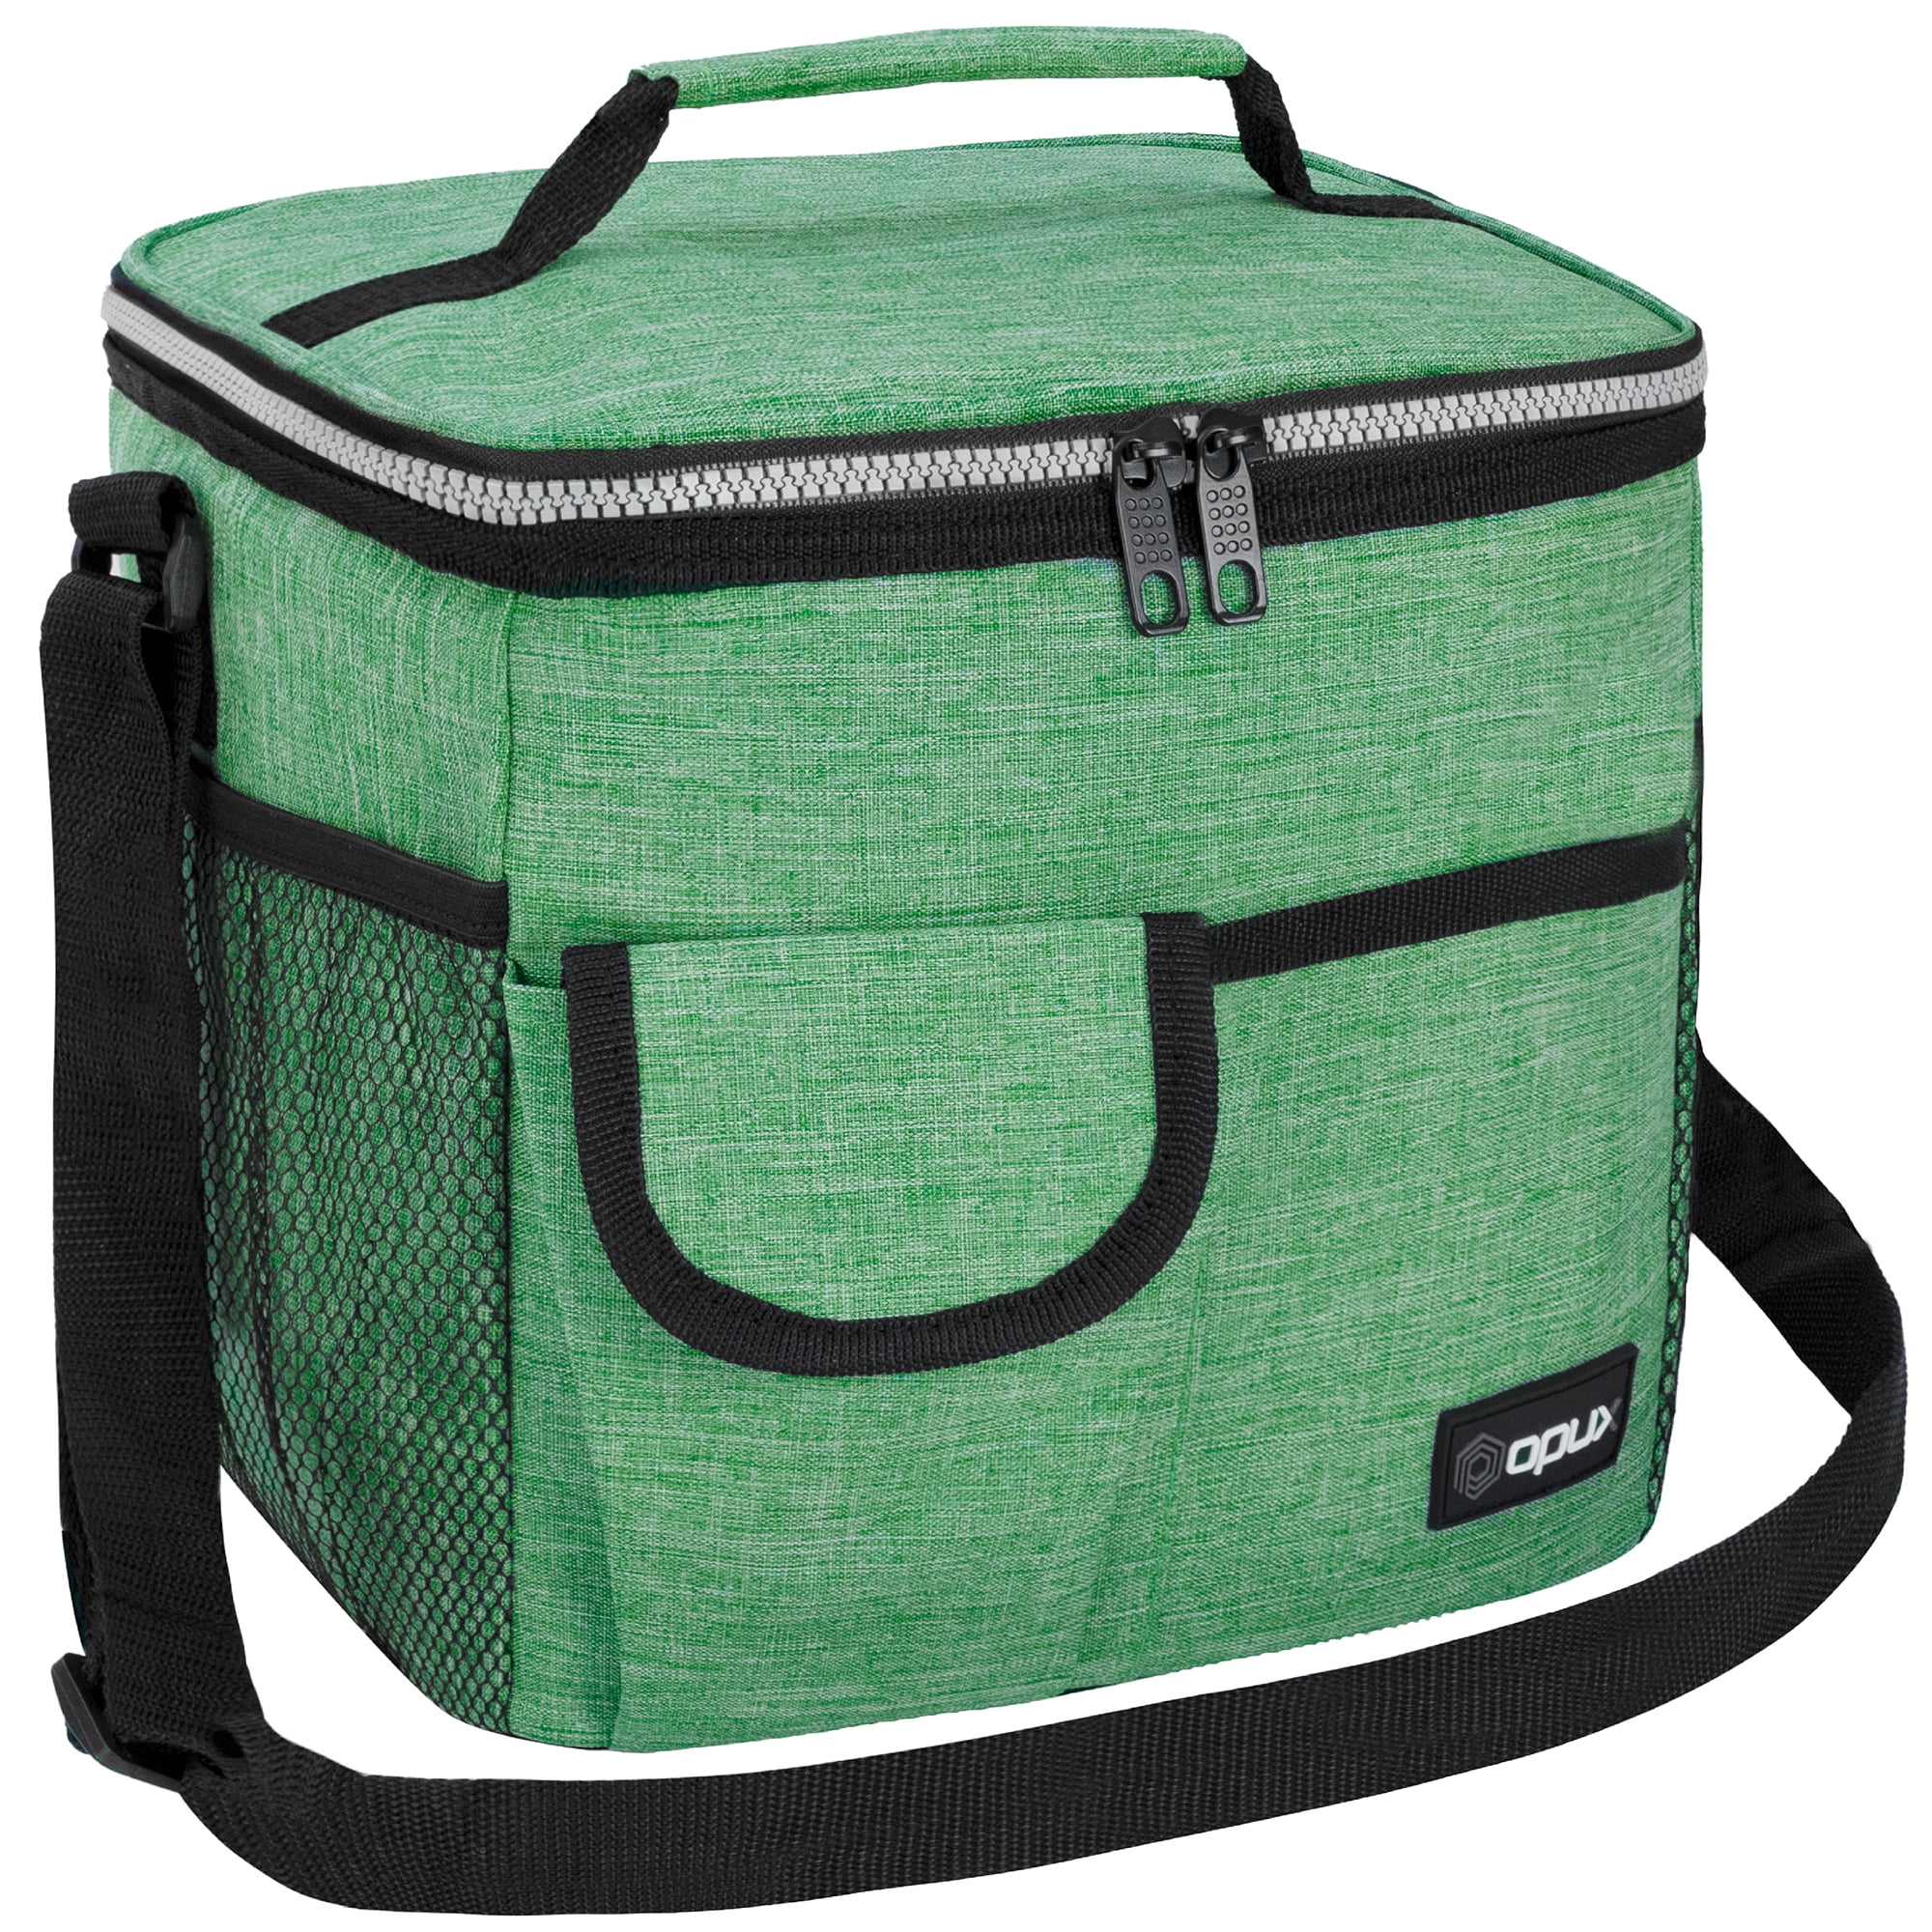 10"x7"x9" New..Fit And Fresh Insulated Lunch Bag With reusable chiller pack! 